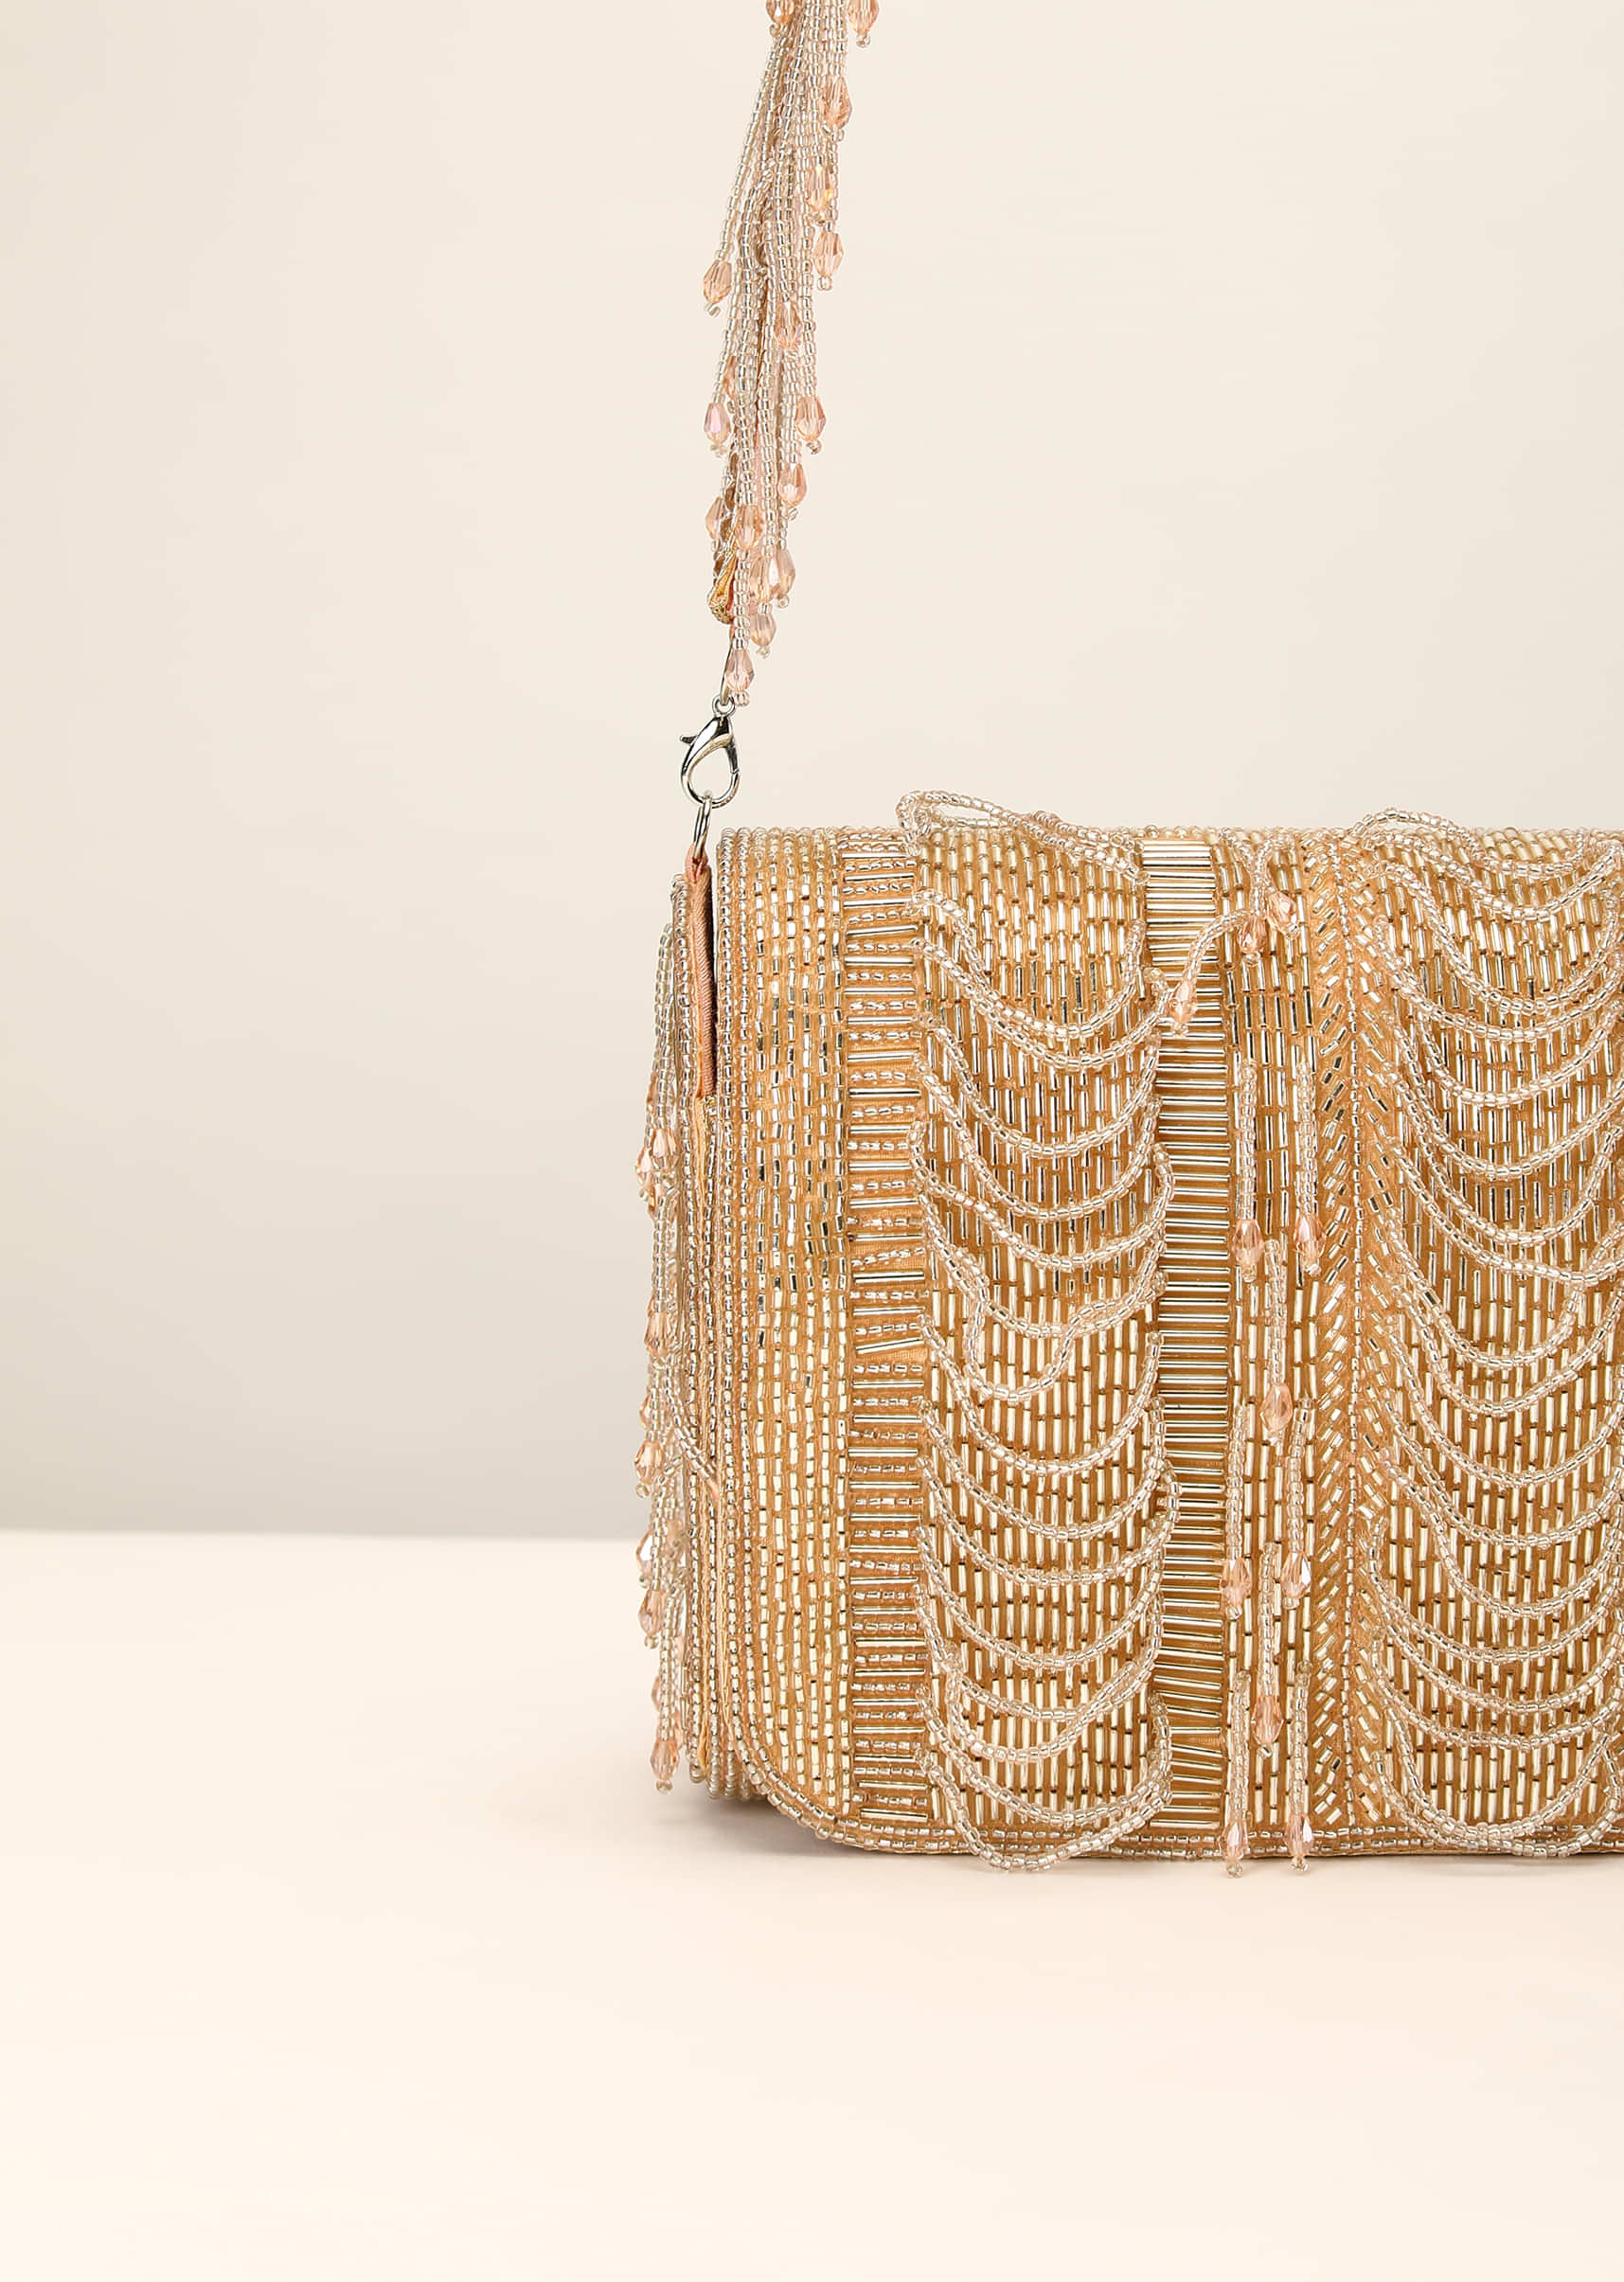 Peach And Gold Embroidered Clutch Bag With Cut Dana Work And Bead Loops